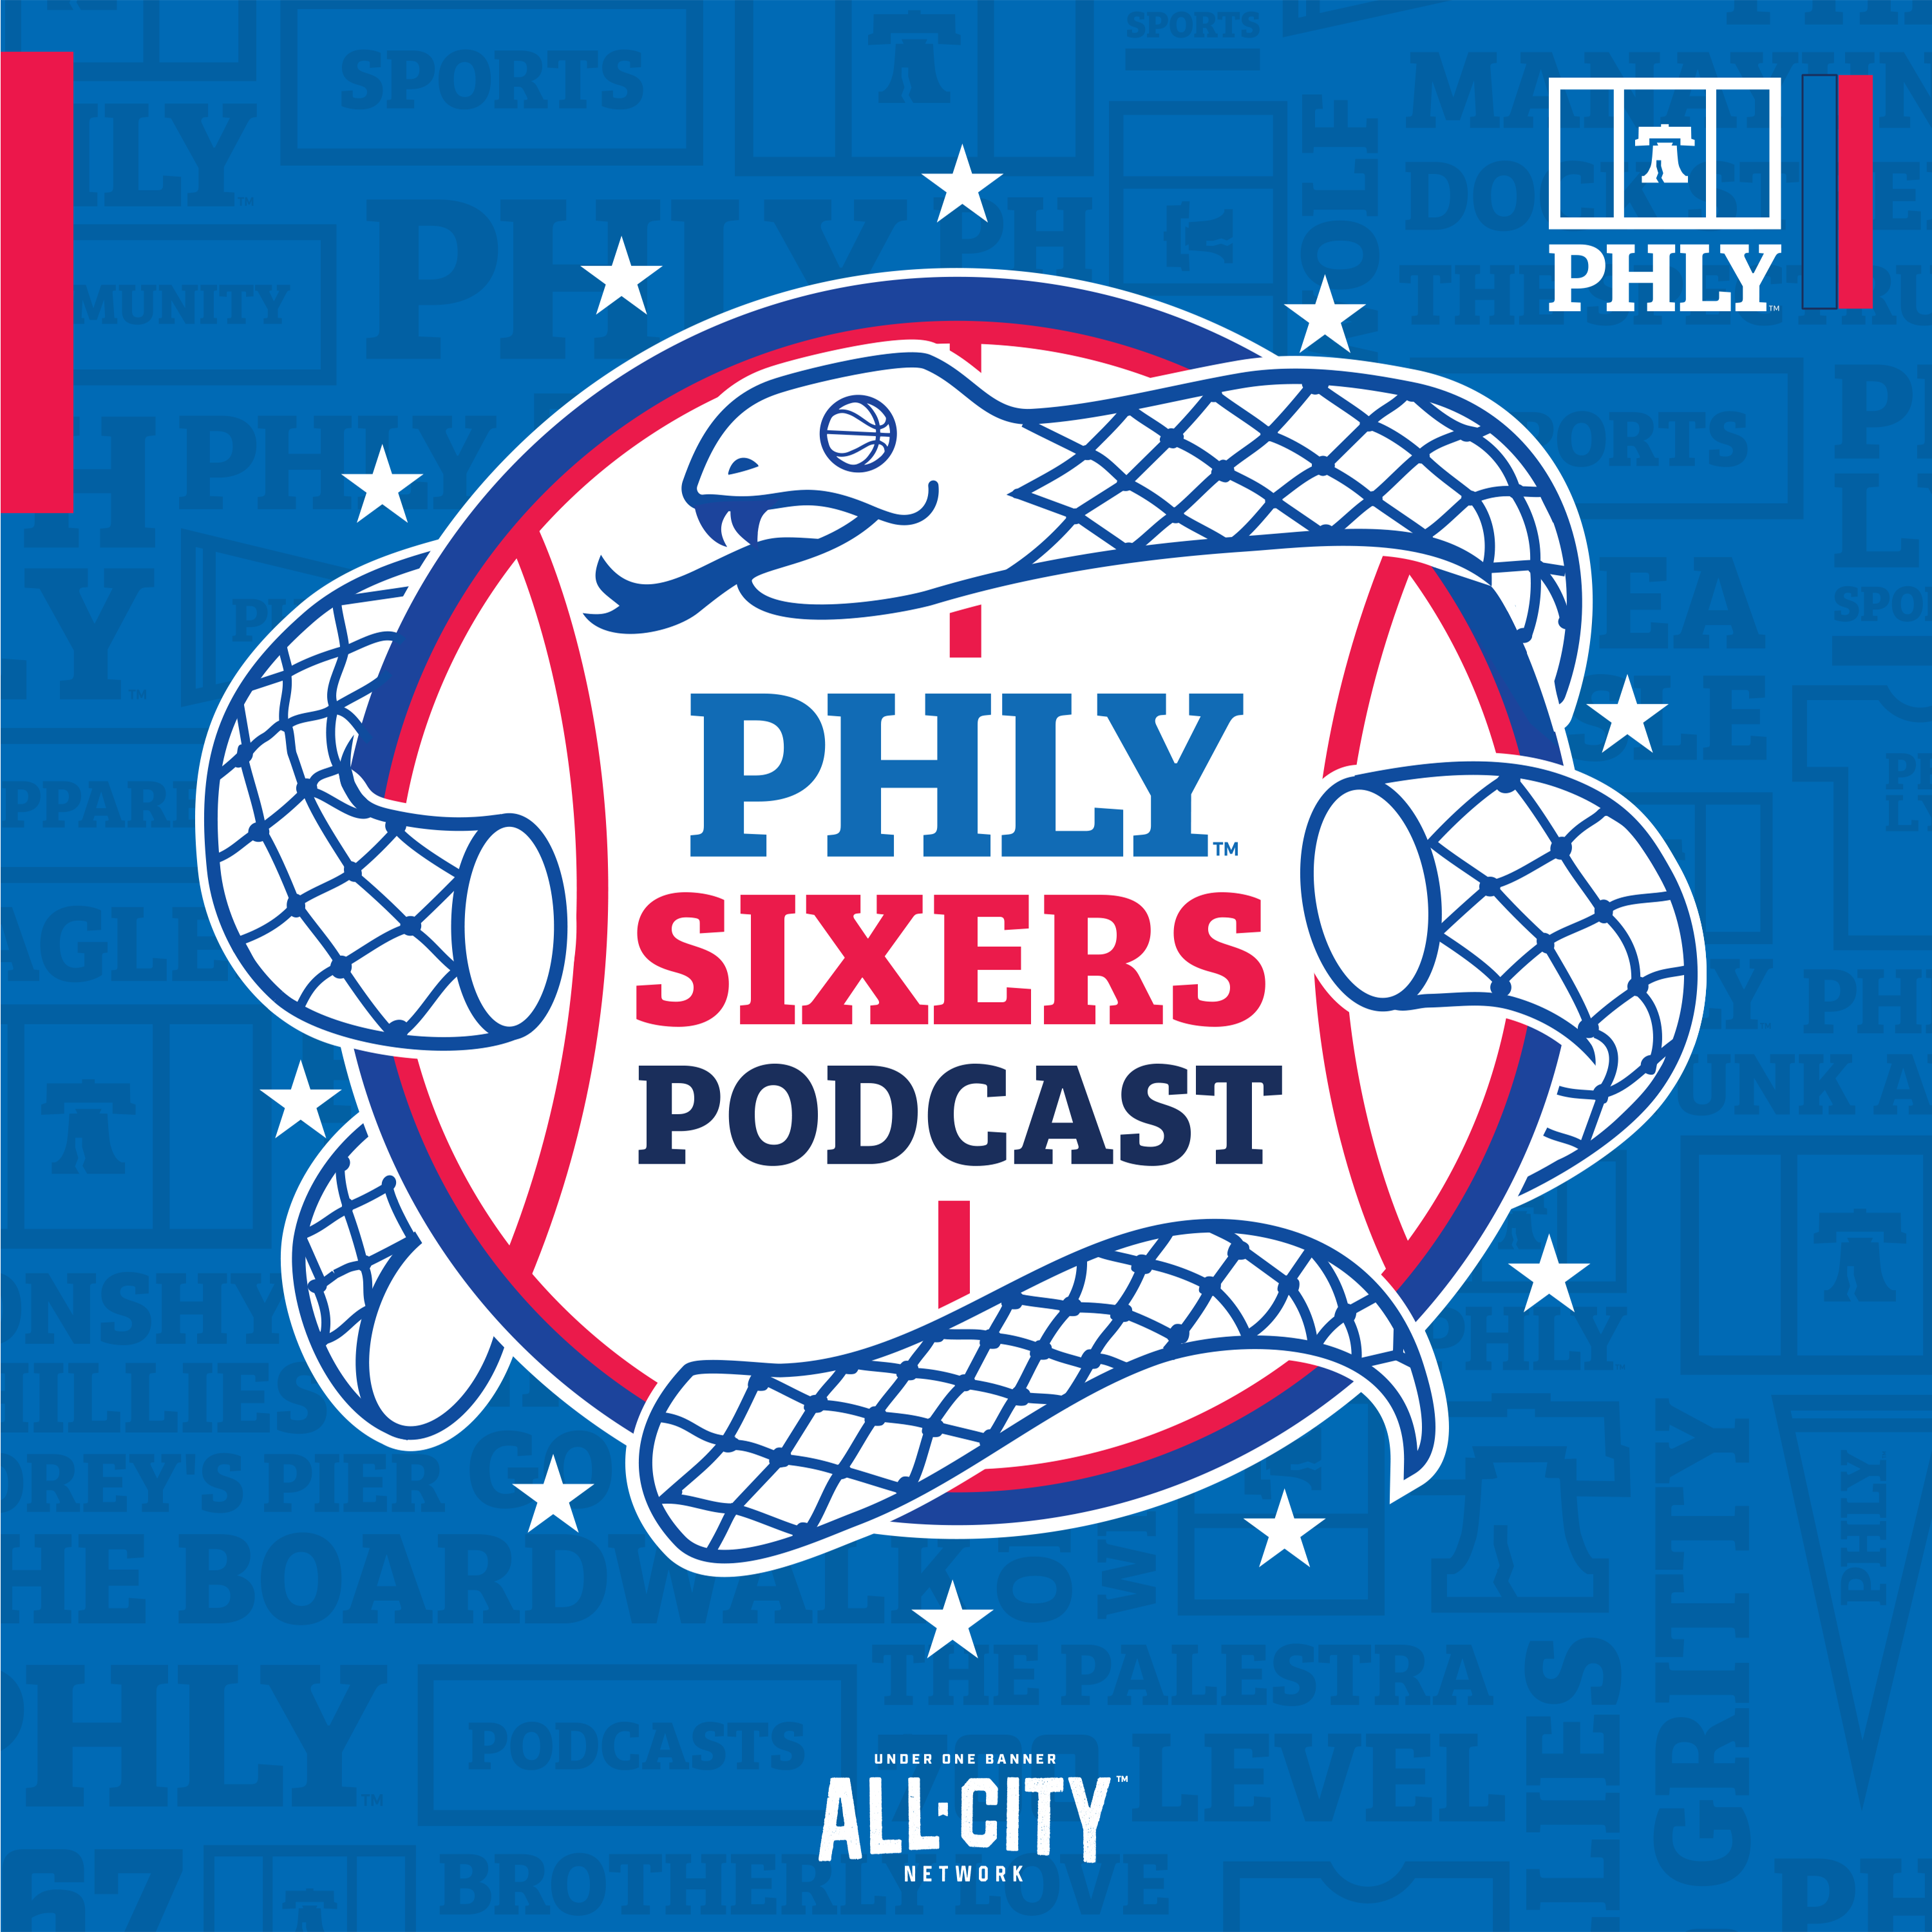 PHLY Sixers Podcast | Sixers outhustled by Knicks at home in Game 4, now in 3-1 series hole